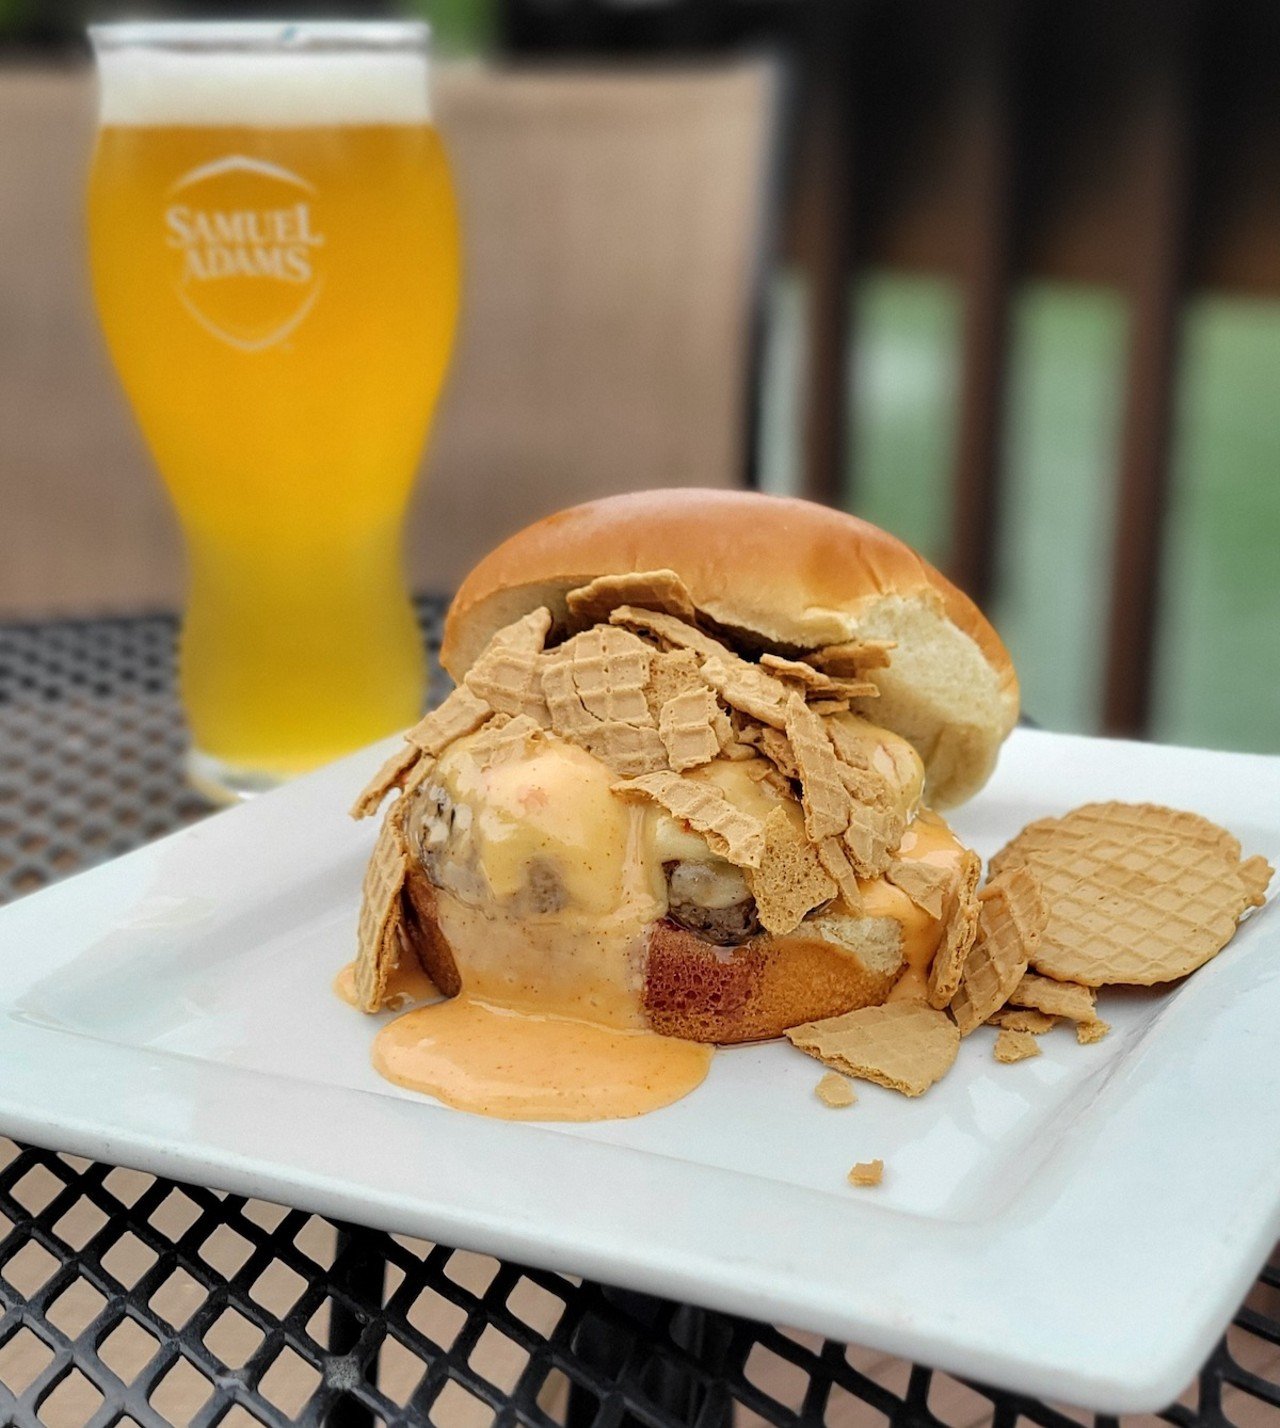 deSha’s
11320 Montgomery Road, Symmes Township
Burger & Waffles: Chargrilled all-beef patty with peppadew cheddar cheese and spicy maple aioli, topped with crunchy waffle chips and served on a grilled brioche bun.